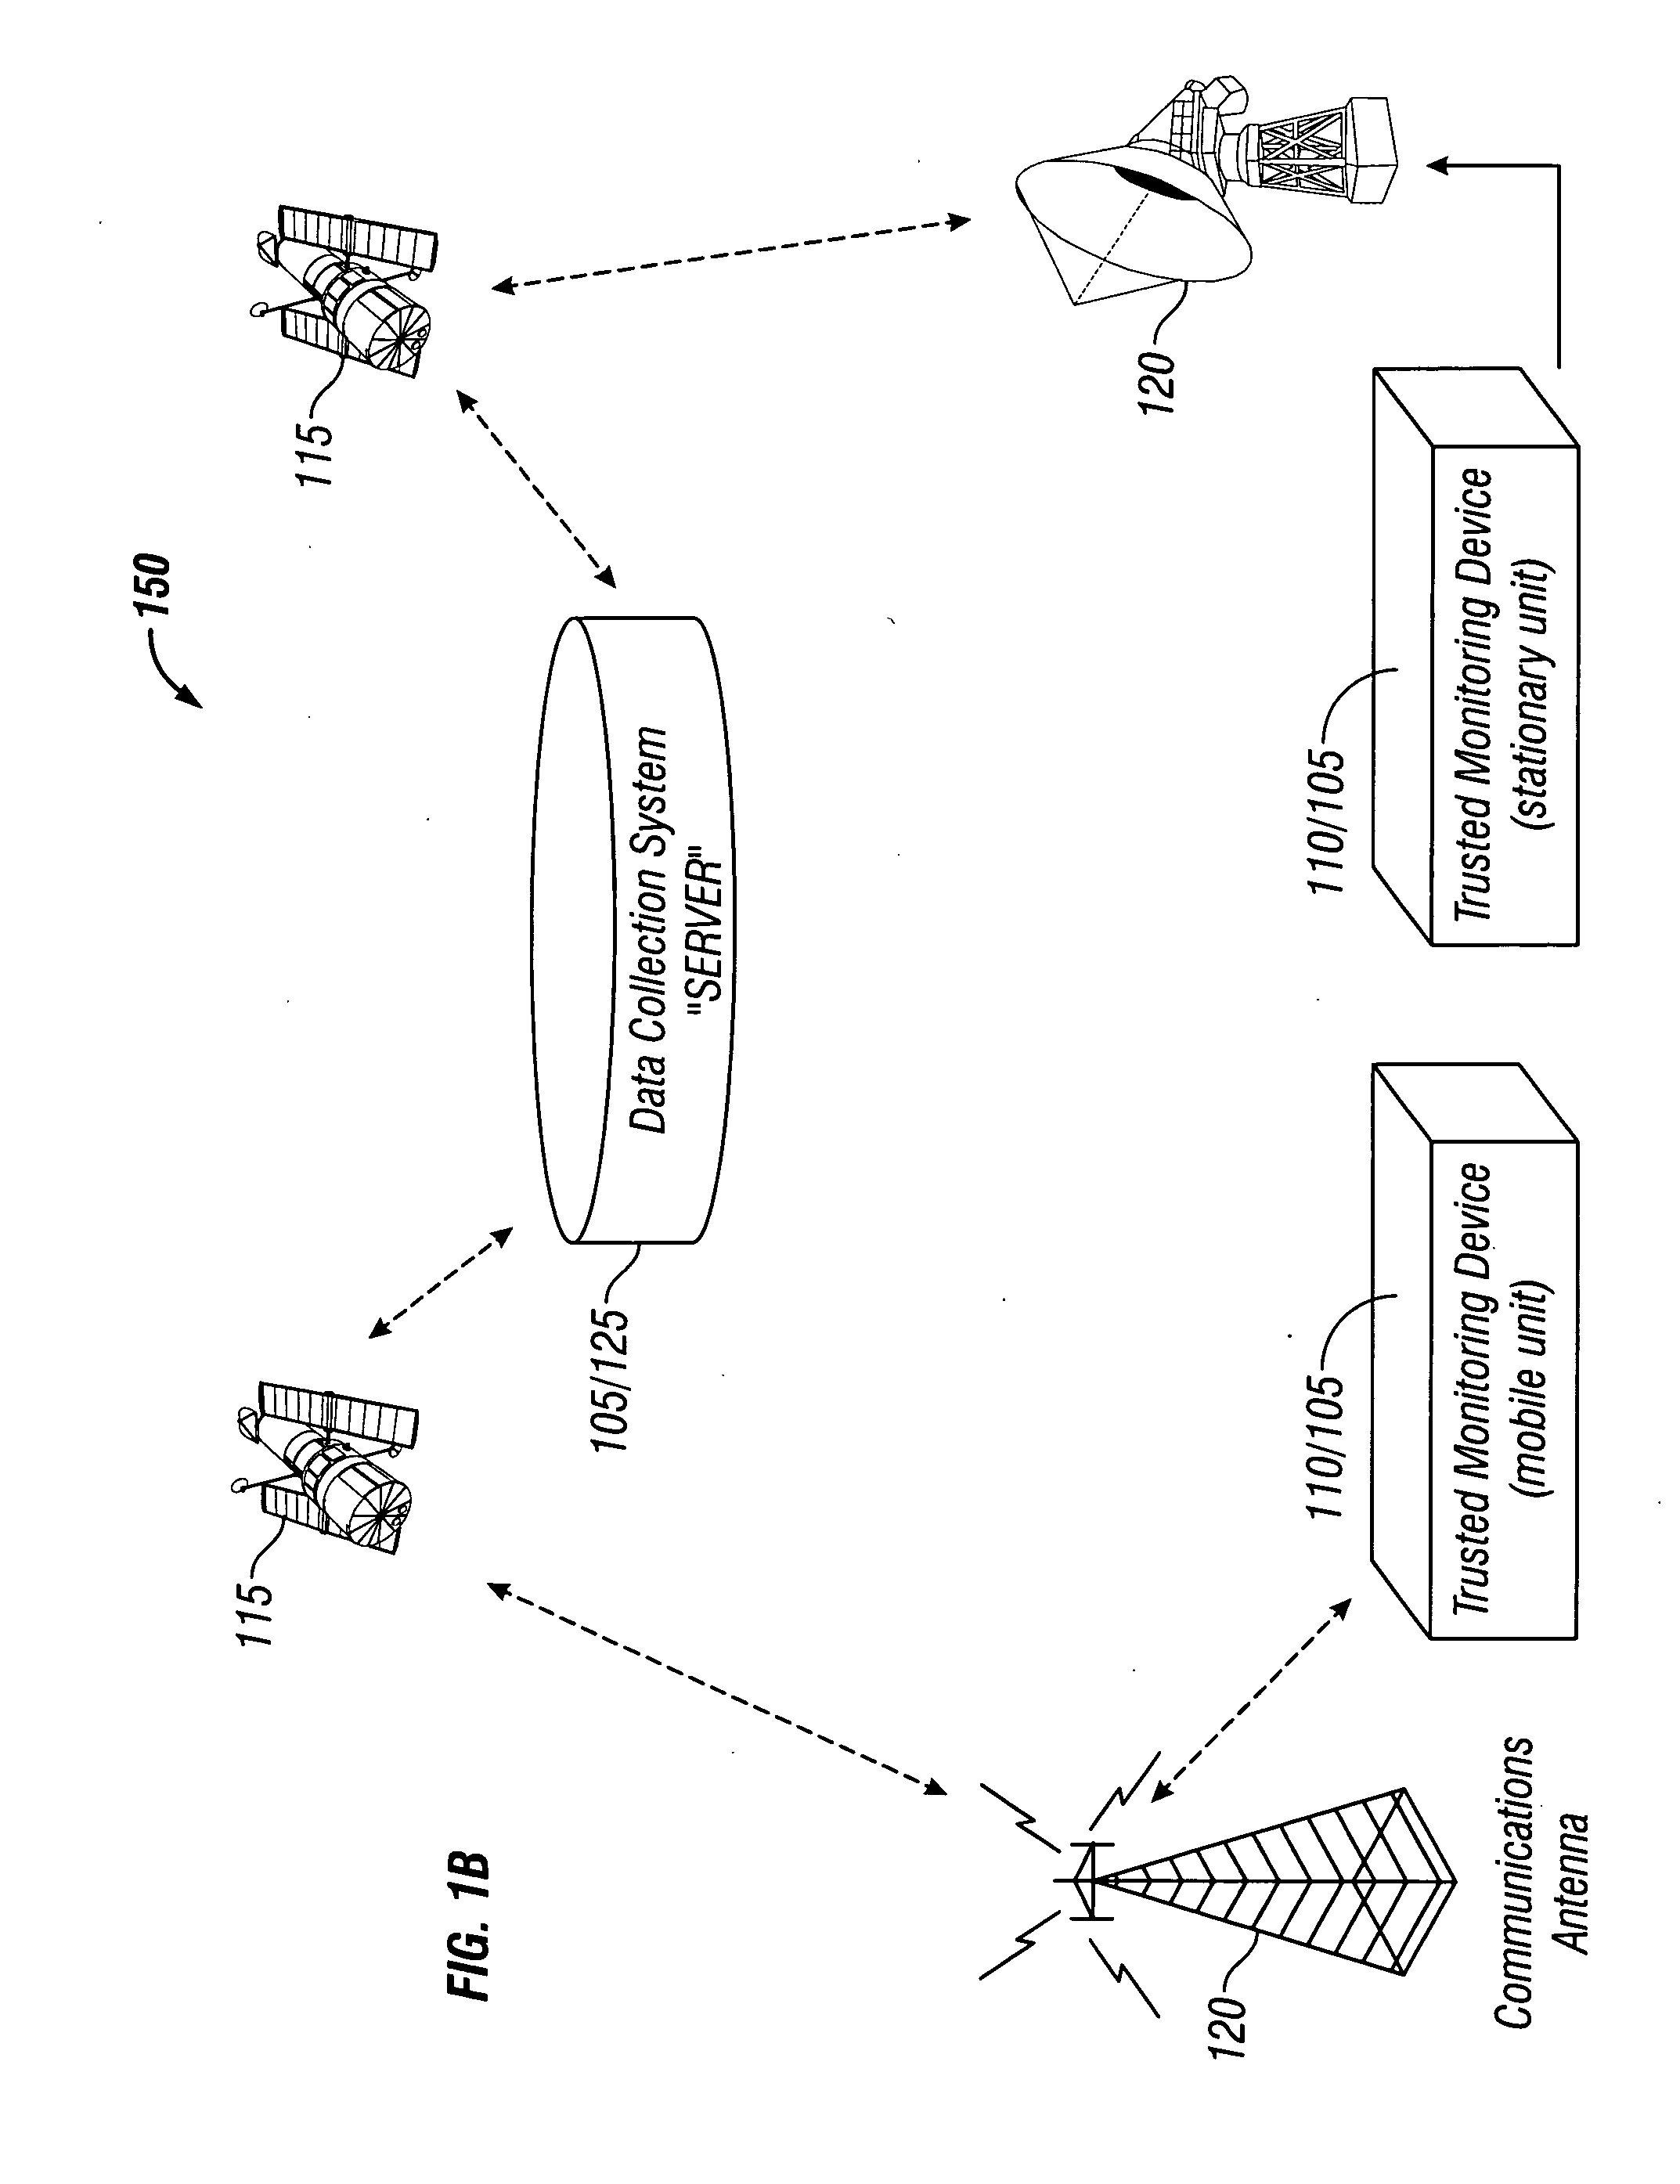 Trusted monitoring system and method